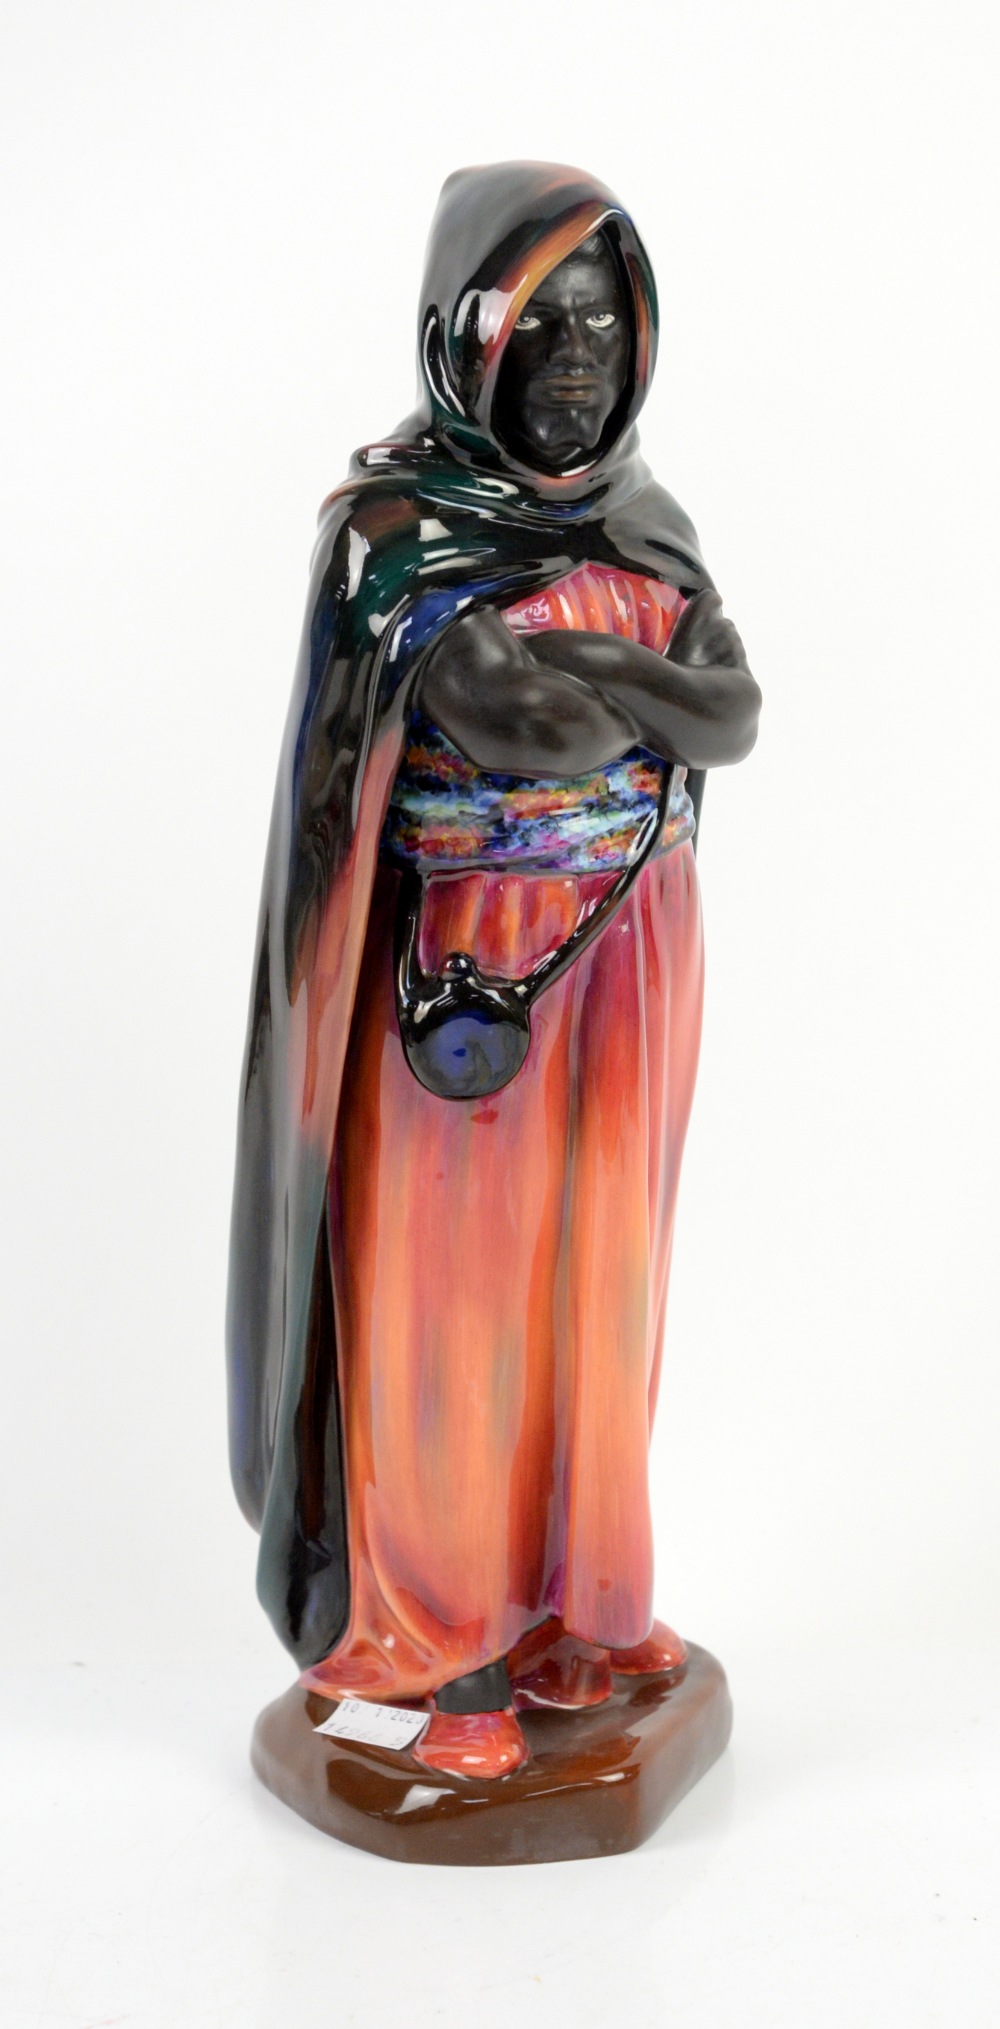 Royal Doulton figure, 'The Moor' no. HN2082, factory marks and marked '24.3.82', h43cm. No box